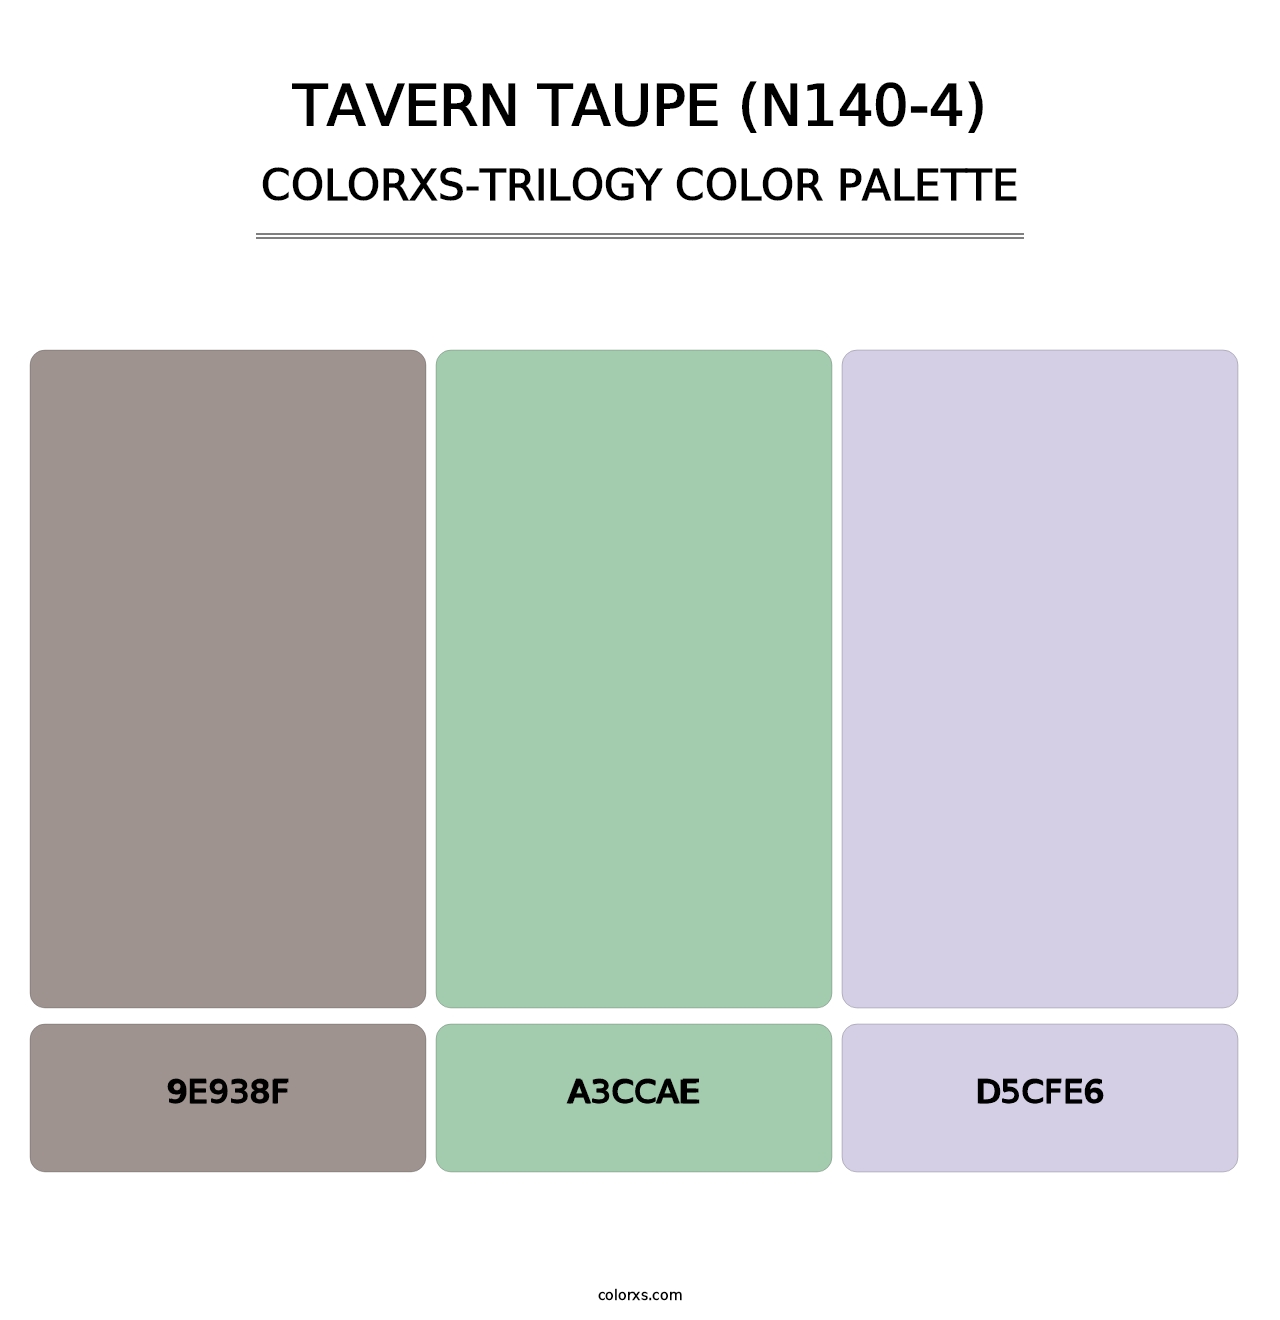 Tavern Taupe (N140-4) - Colorxs Trilogy Palette